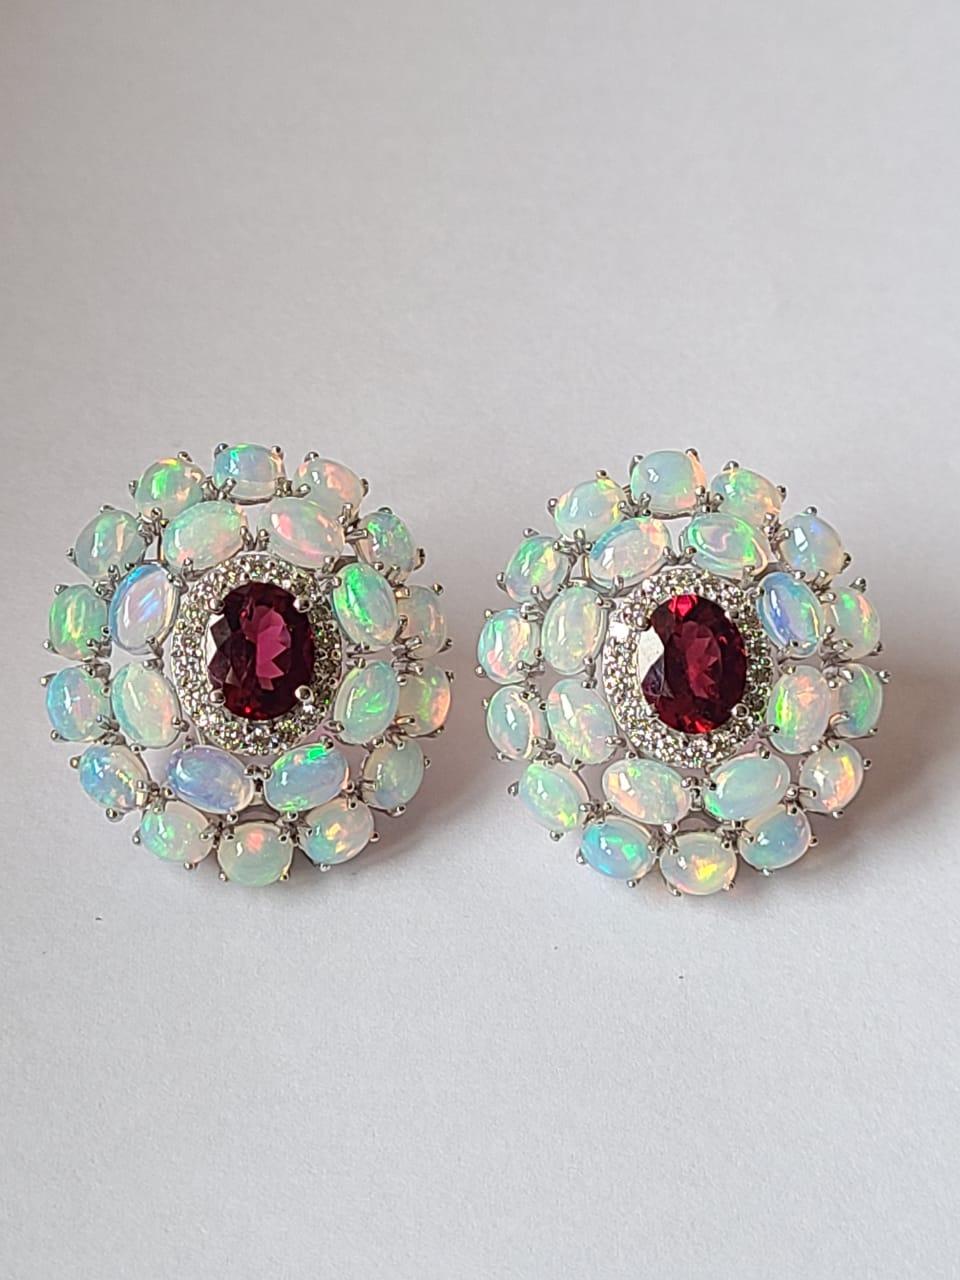 A very  beautiful and one of a kind, Rubellite & Ethiopian Opal Studs / Lever-back Earrings set in 18K Gold & Diamonds. The weight of the Rubellite is 3.64 carats. The weight of the Opal Cabochons is 12.30 carats. The opals are of Ethiopian origin.